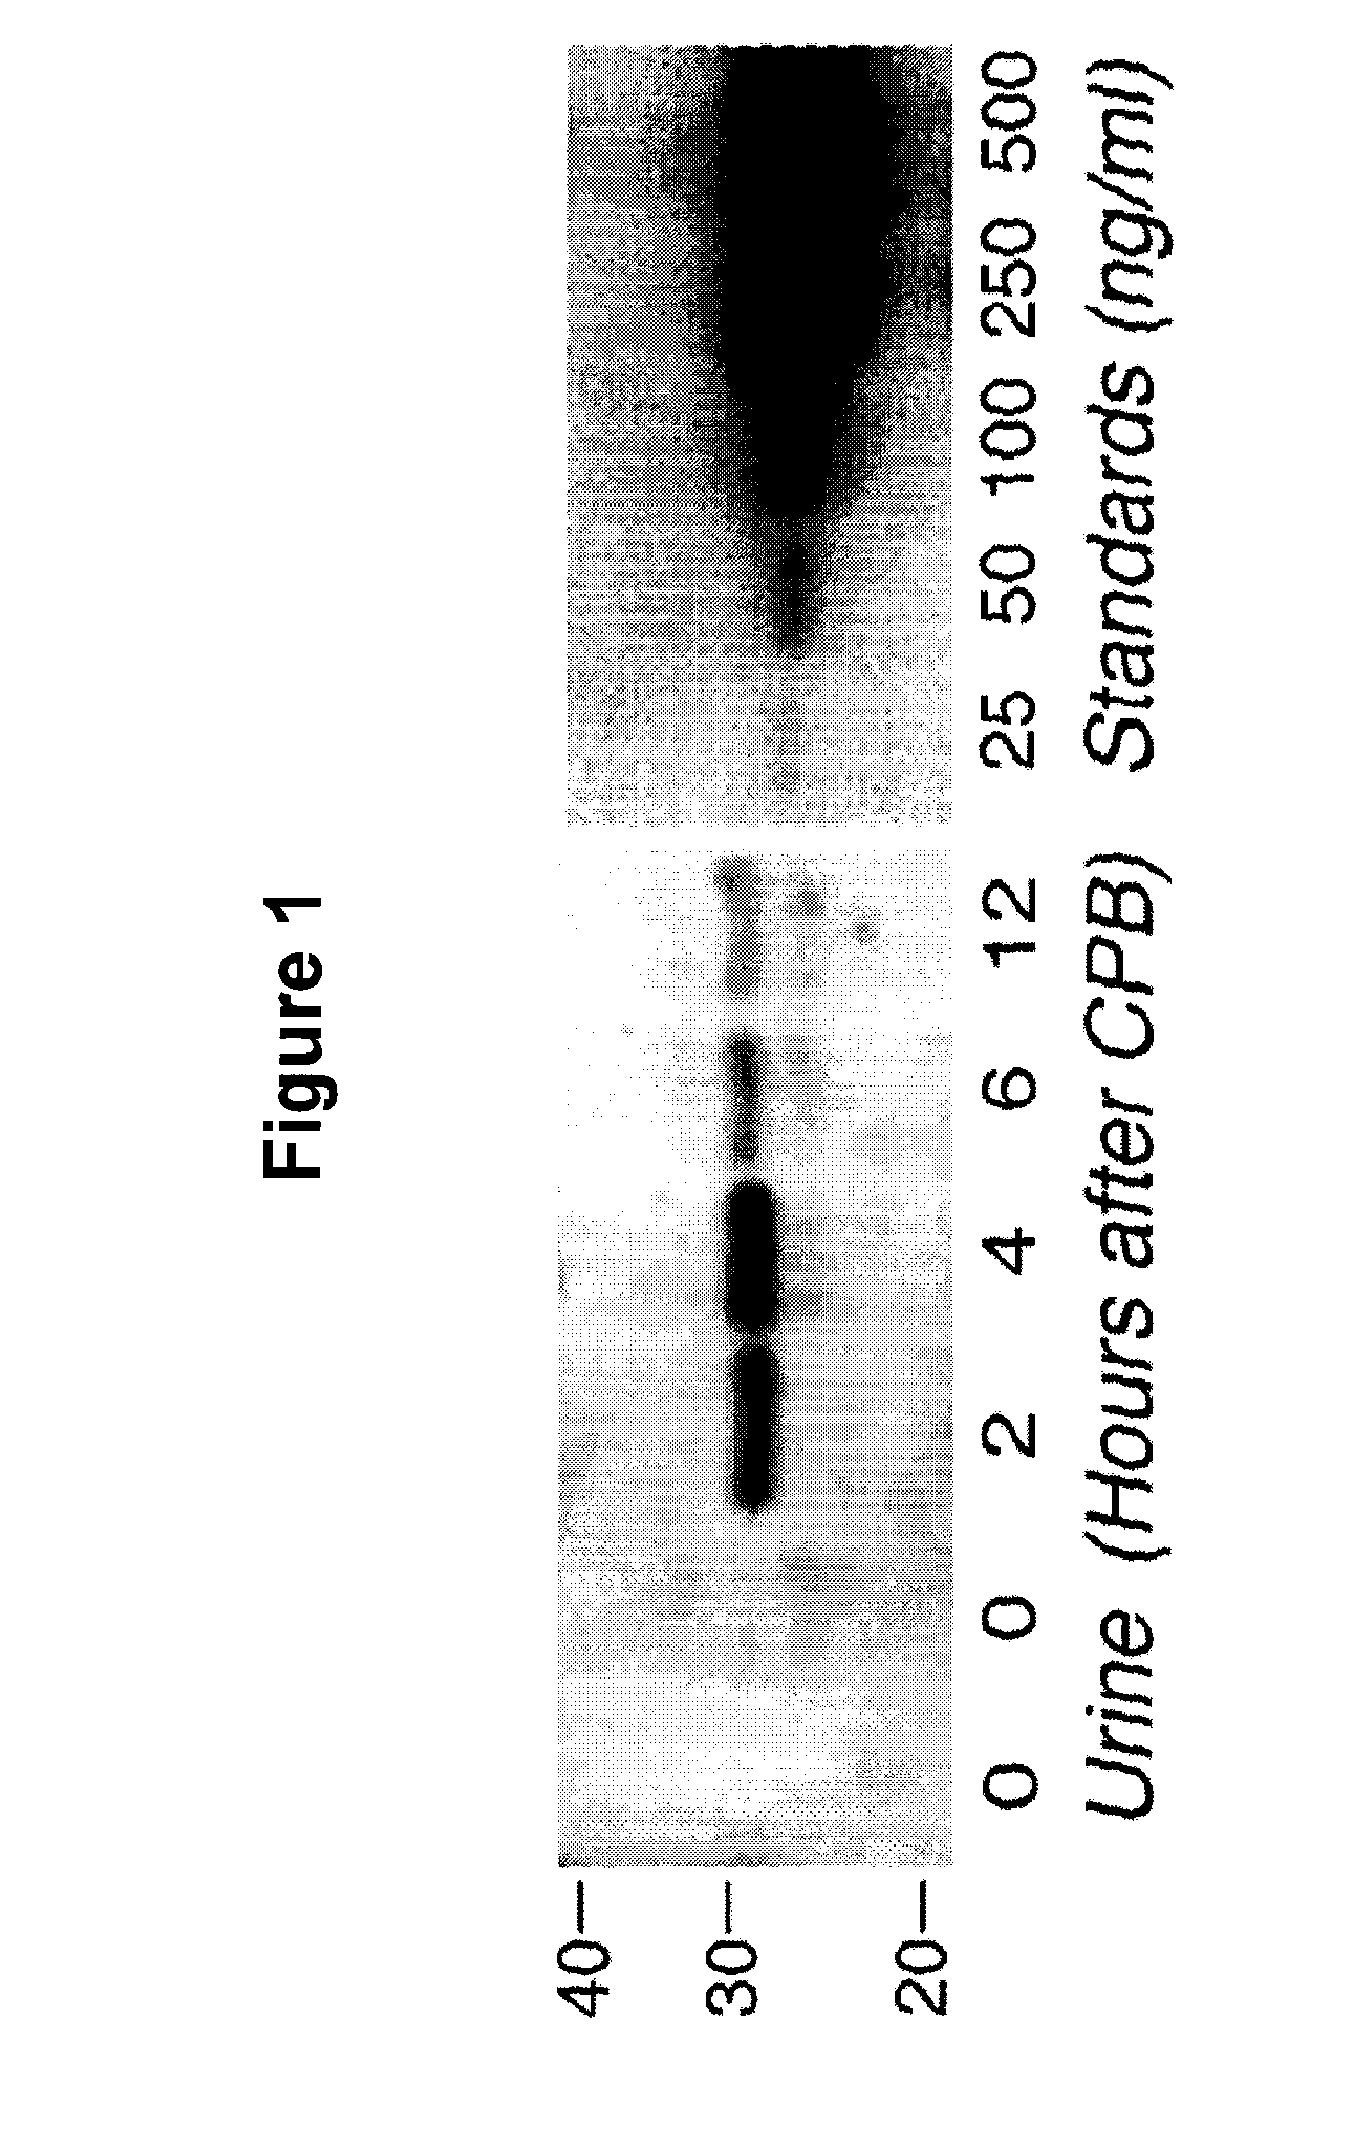 Method for the early detection of renal injury